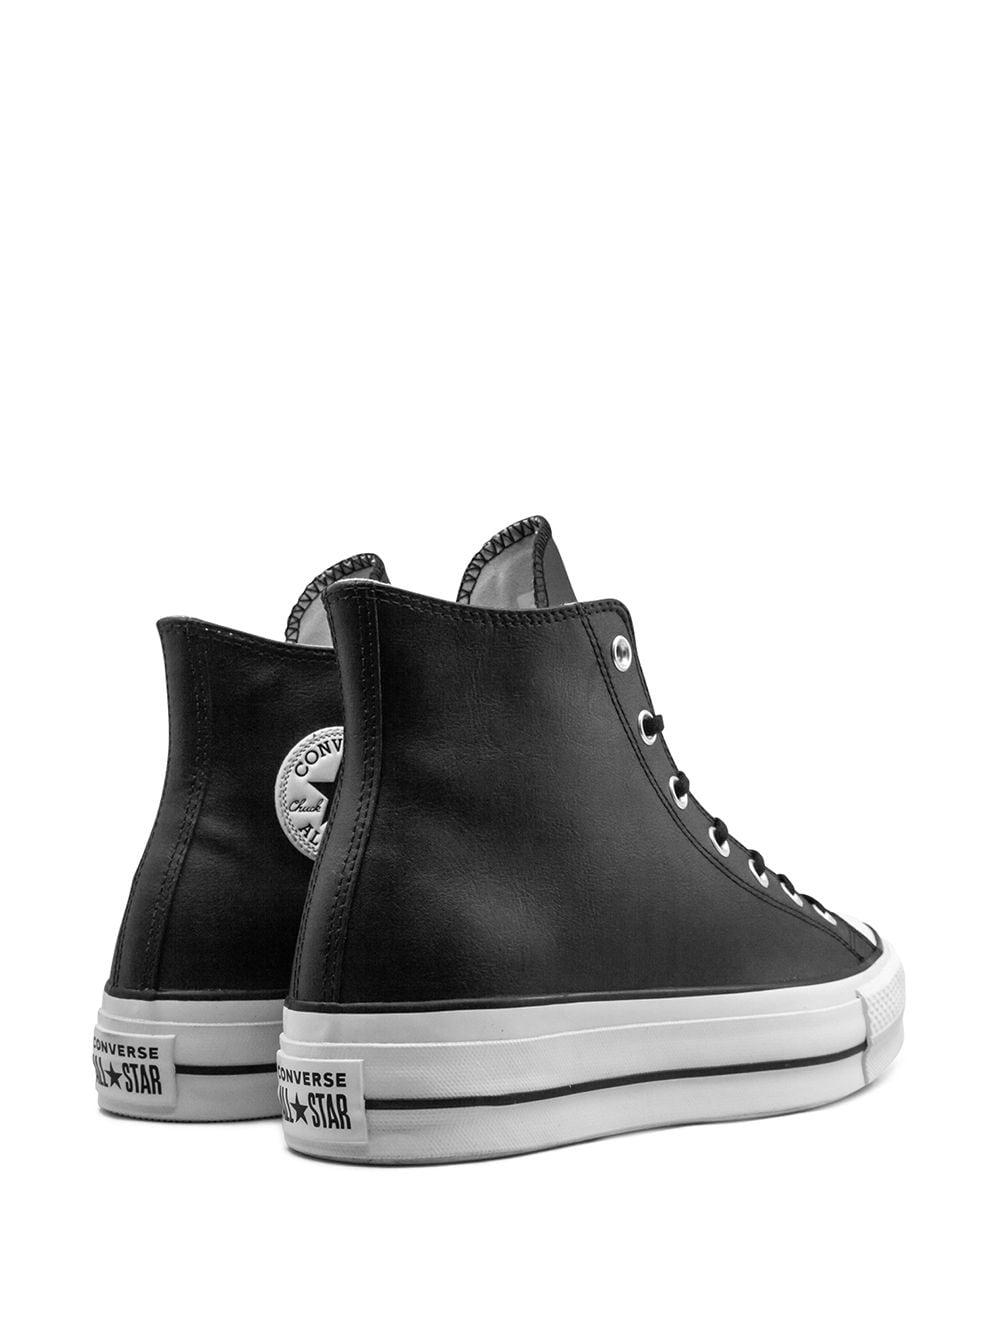 Converse Leather Ctas Lift Clean Hi Sneakers in Black - Lyst